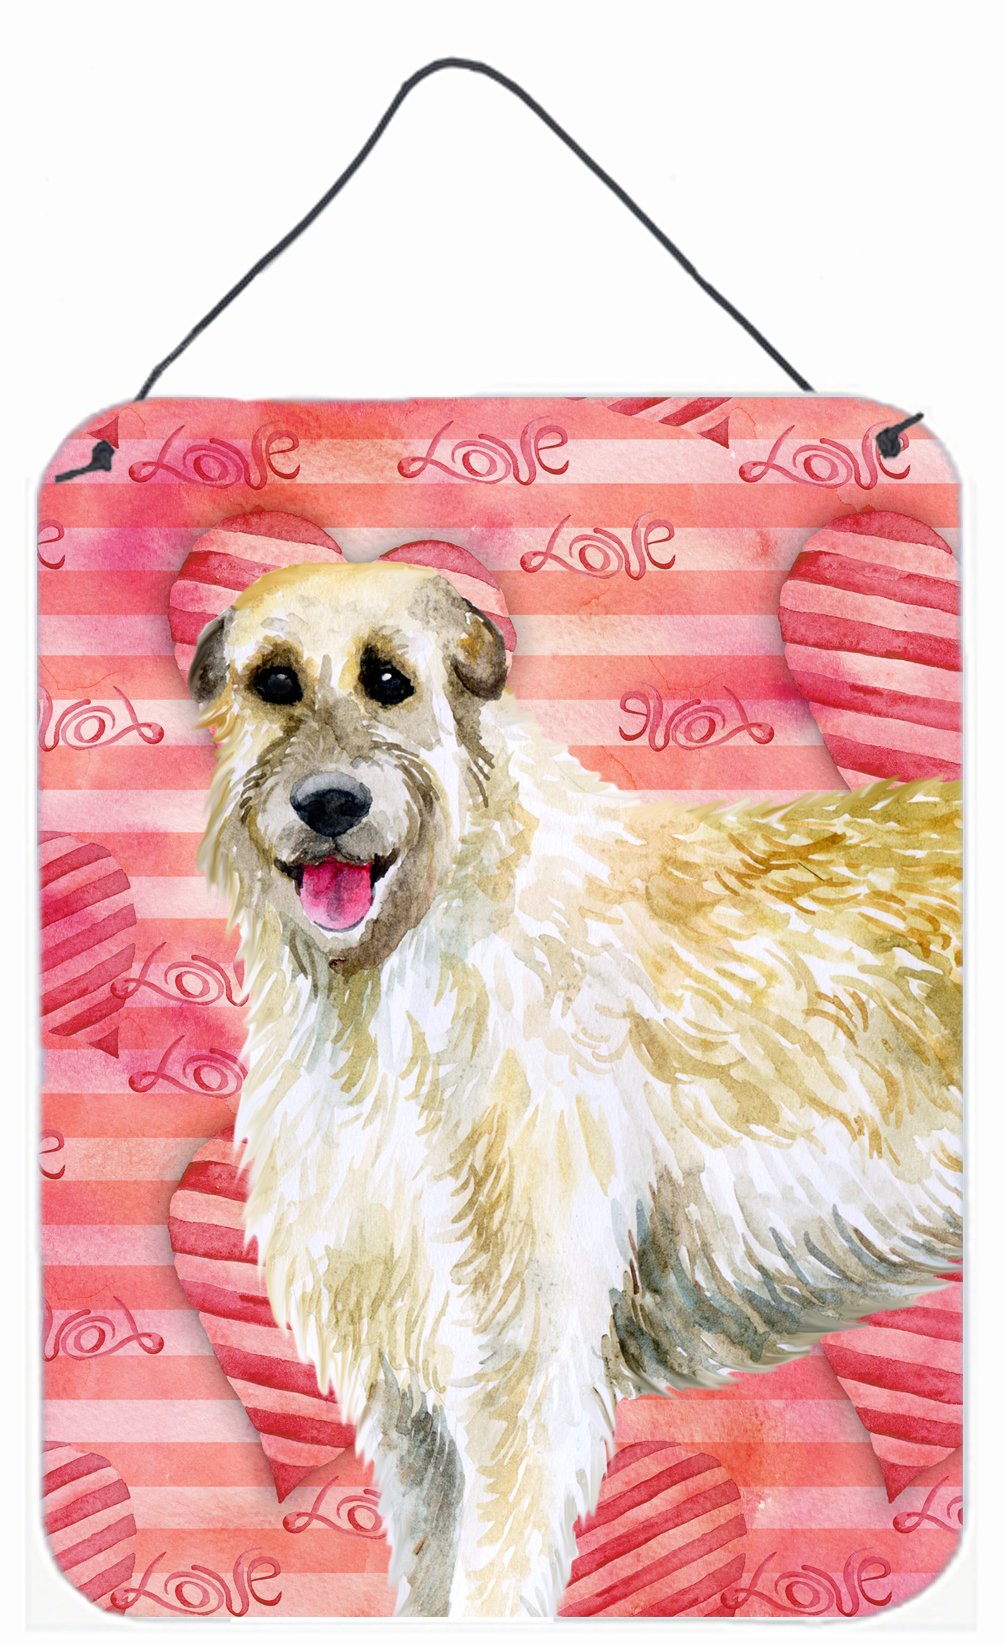 Irish Wolfhound Love Wall or Door Hanging Prints BB9757DS1216 by Caroline's Treasures